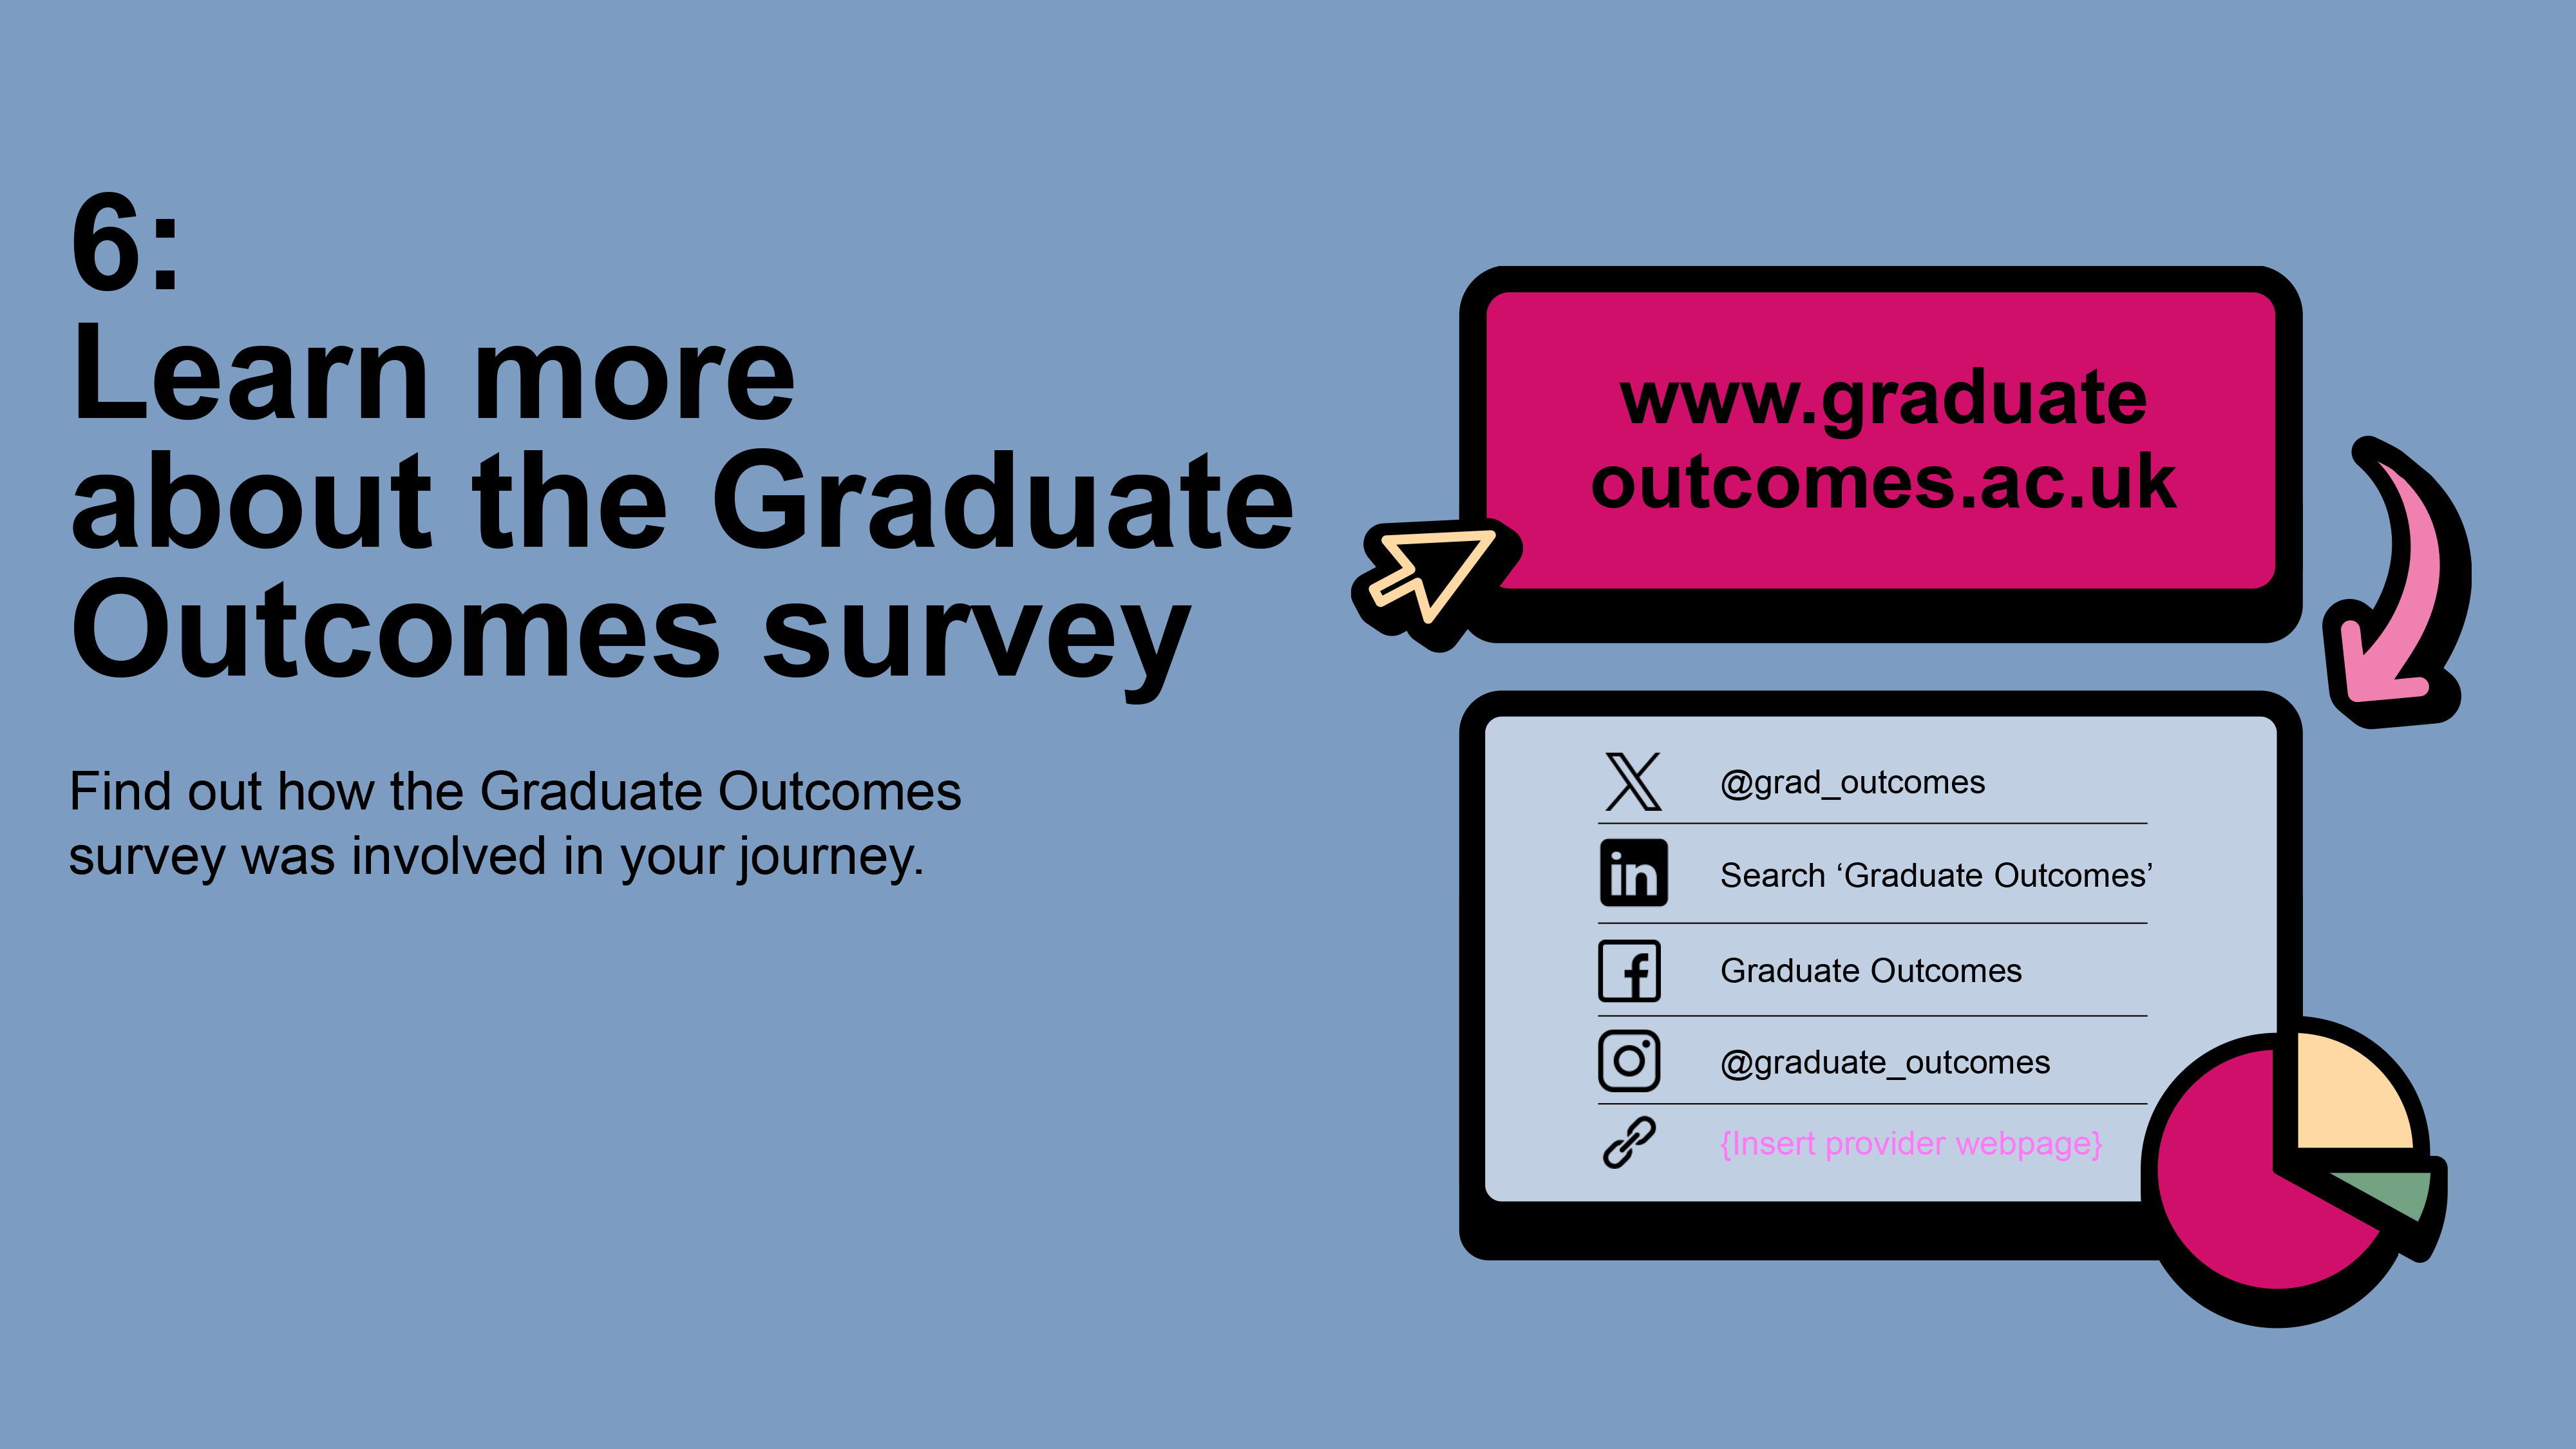 Learn more about the Graduate Outcomes survey